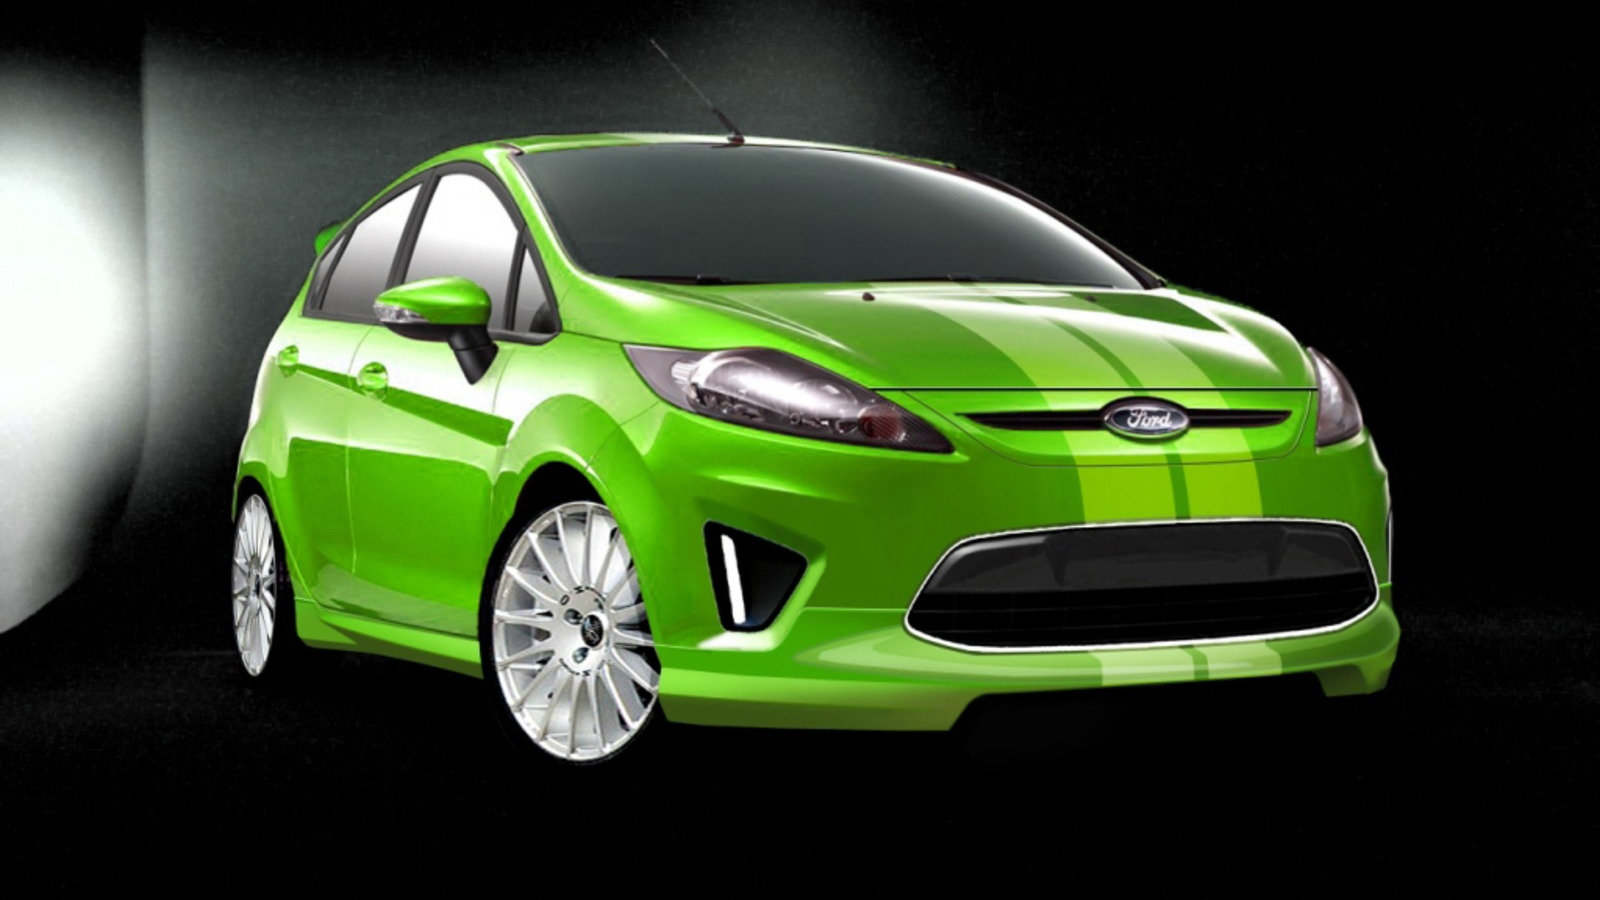 2011 Ford Fiesta concepts for 2010 SEMA show